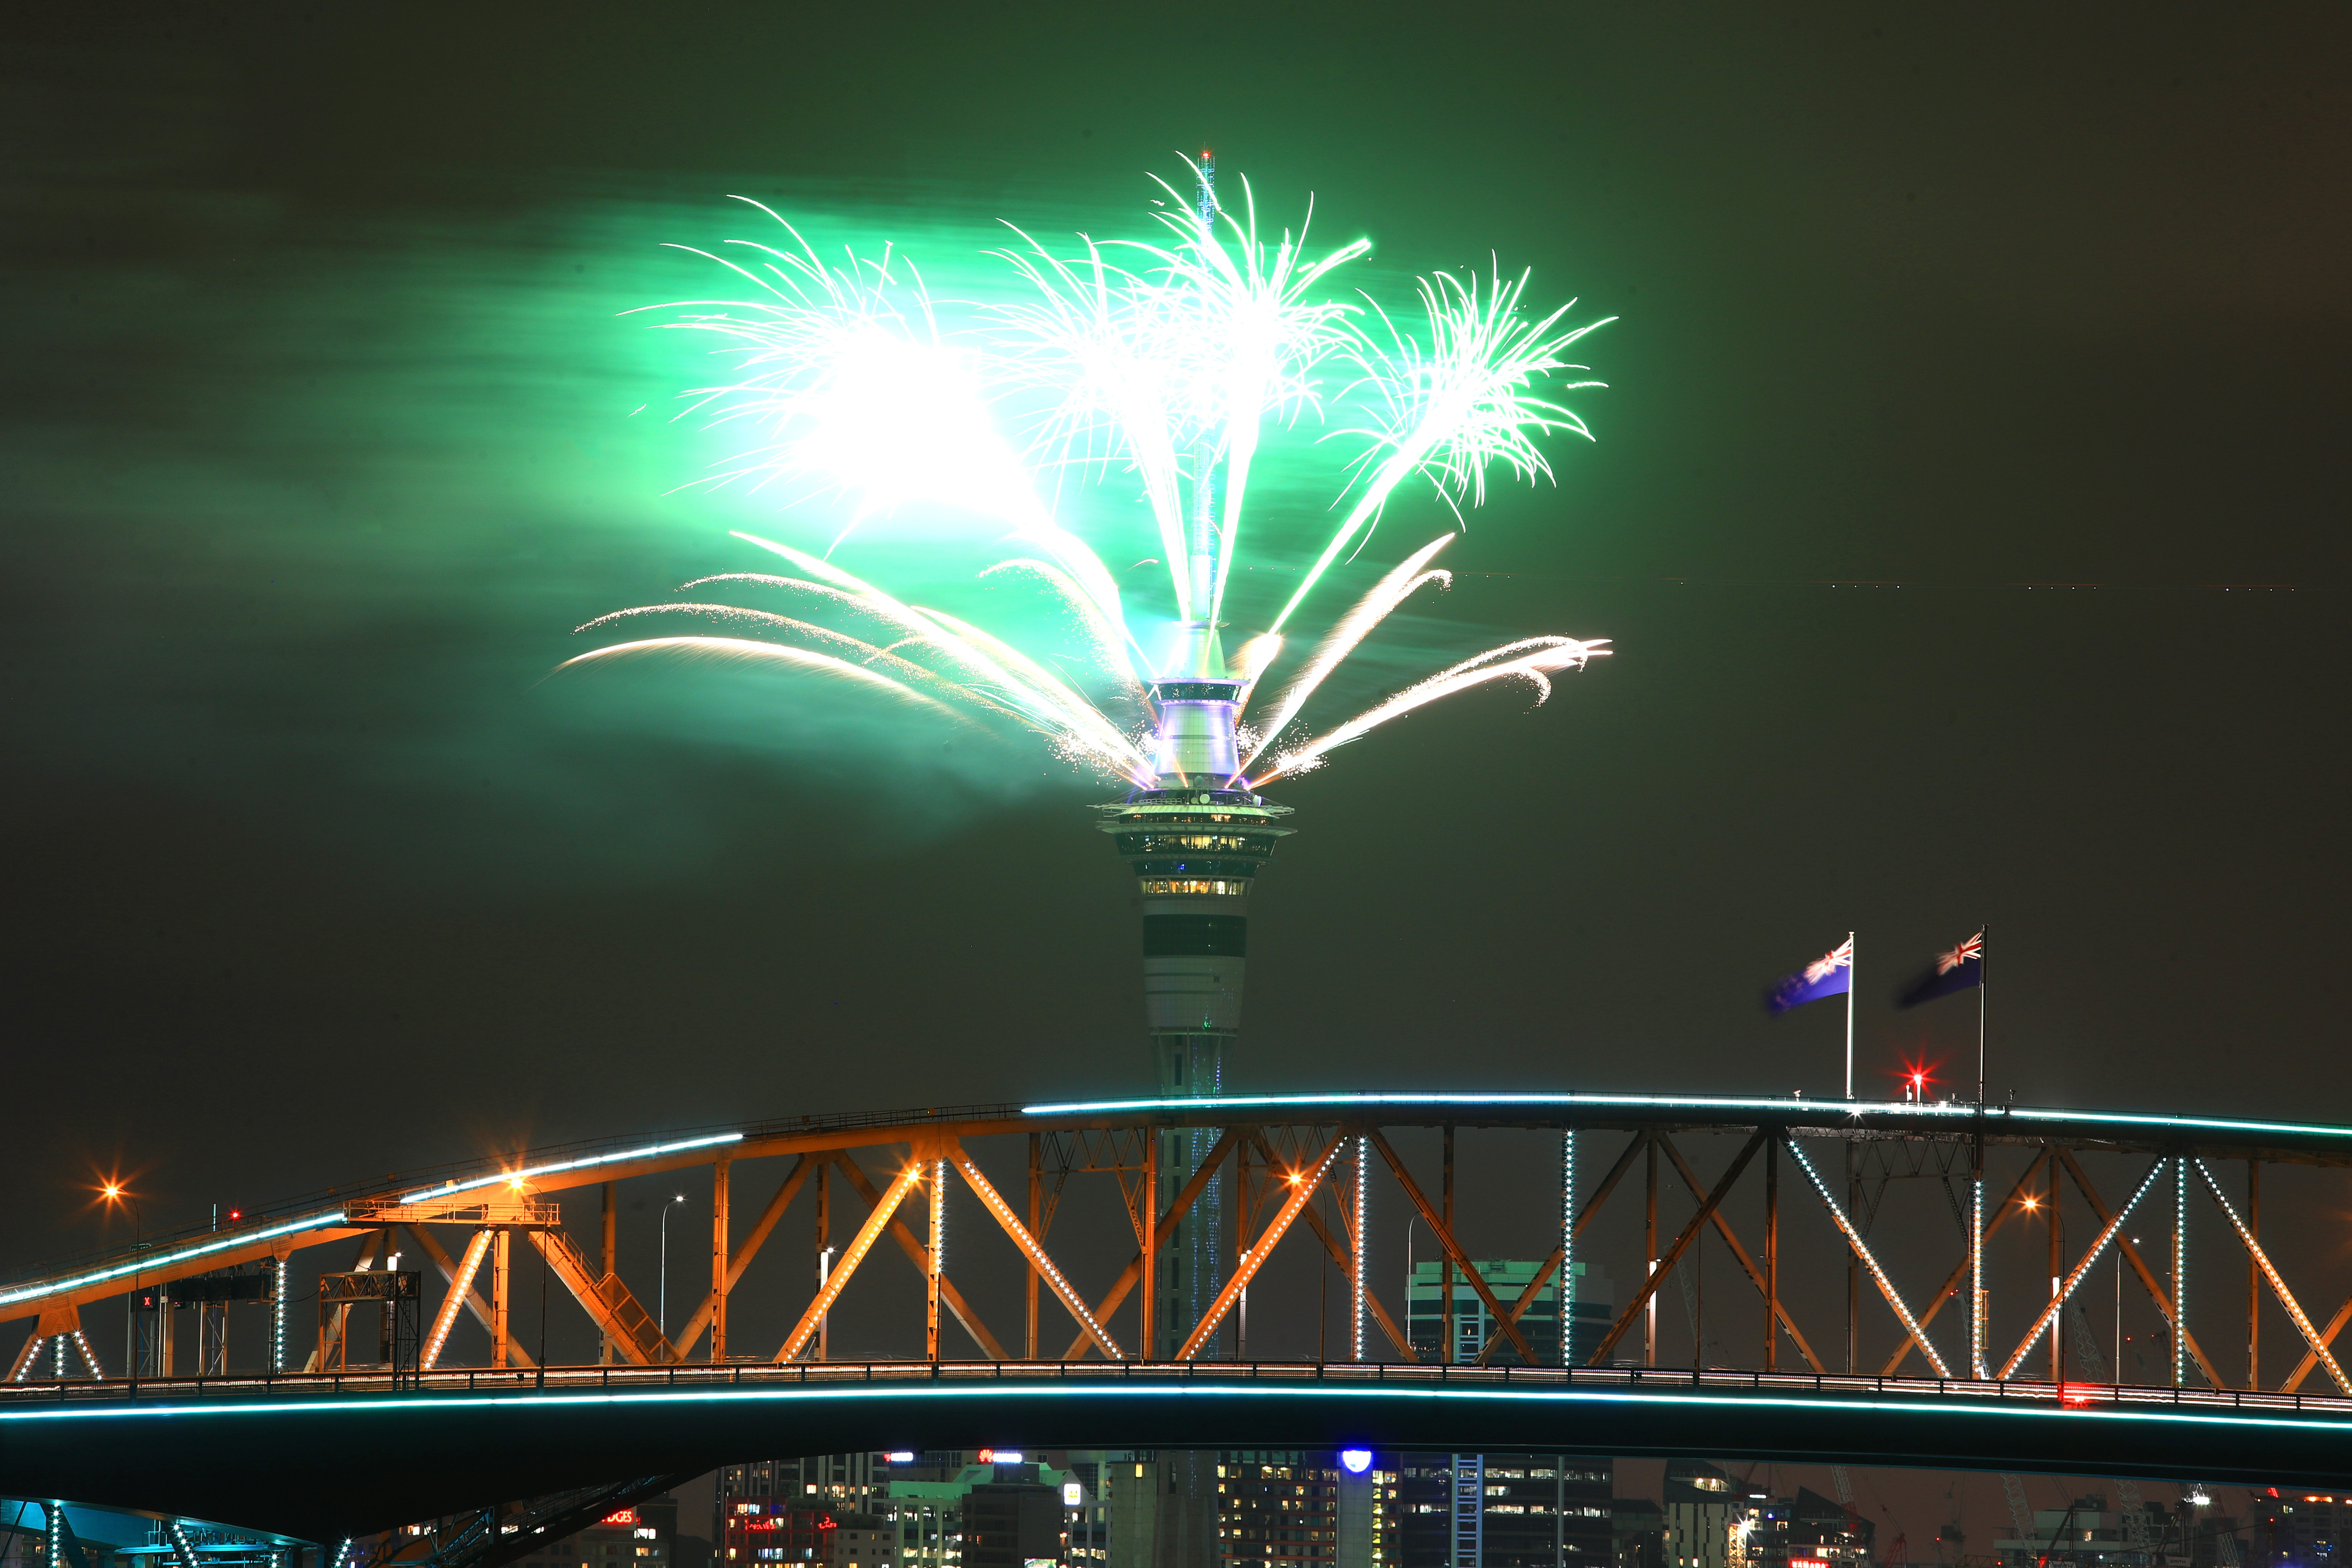 Fireworks are seen exploding from the Sky Tower with the Auckland Harbour Bridge in the foreground during the Auckland New Year